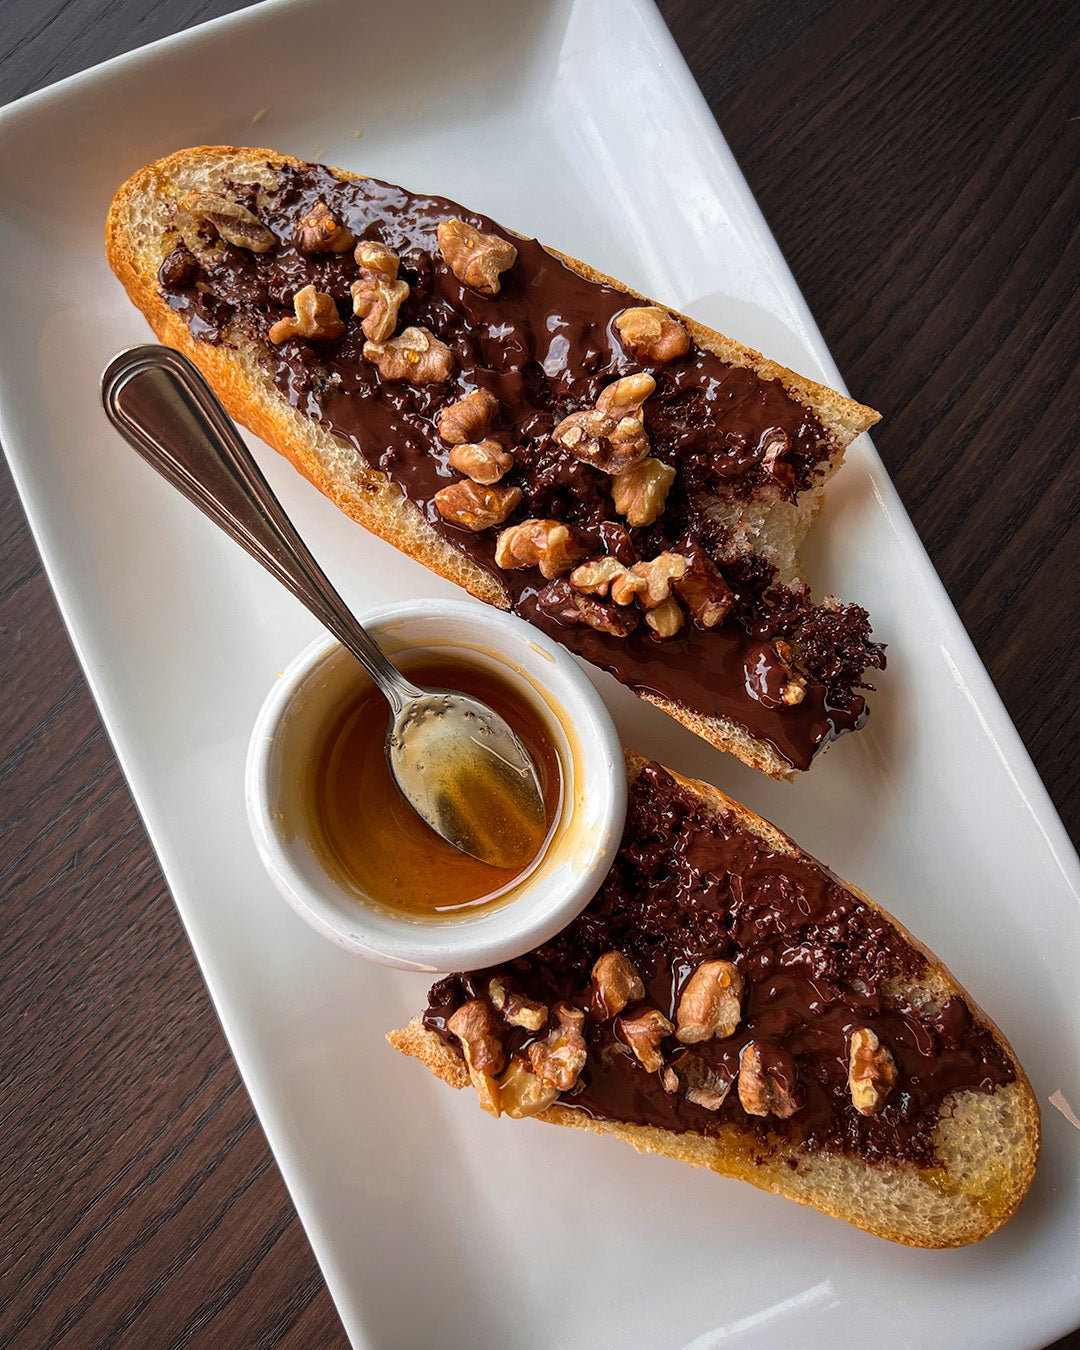 Toasted Baguette with Dark Chocolate